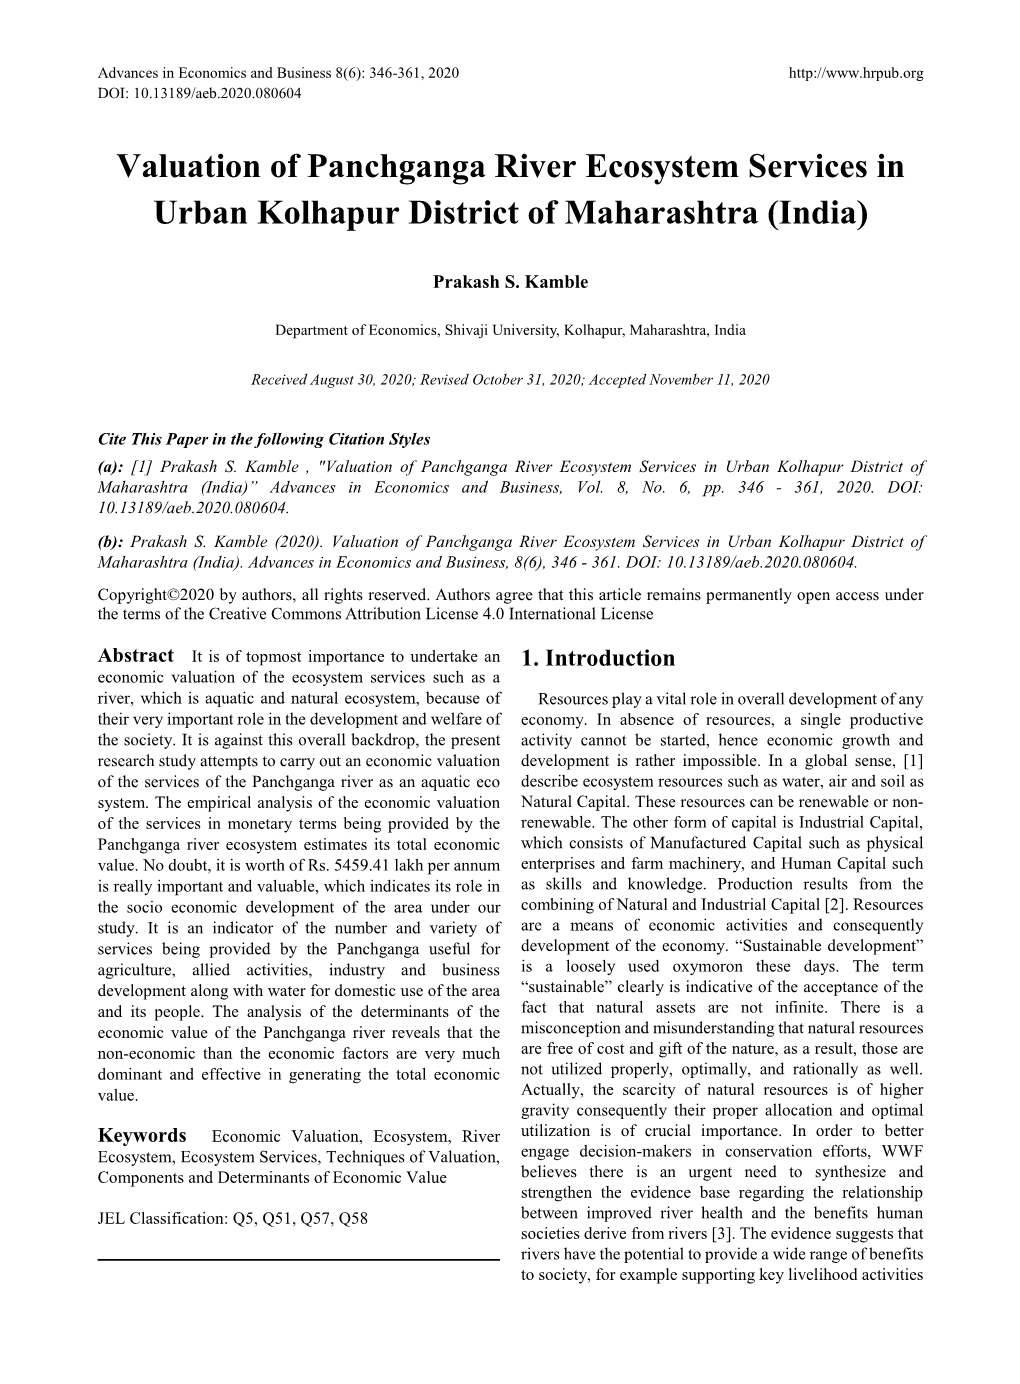 Valuation of Panchganga River Ecosystem Services in Urban Kolhapur District of Maharashtra (India)